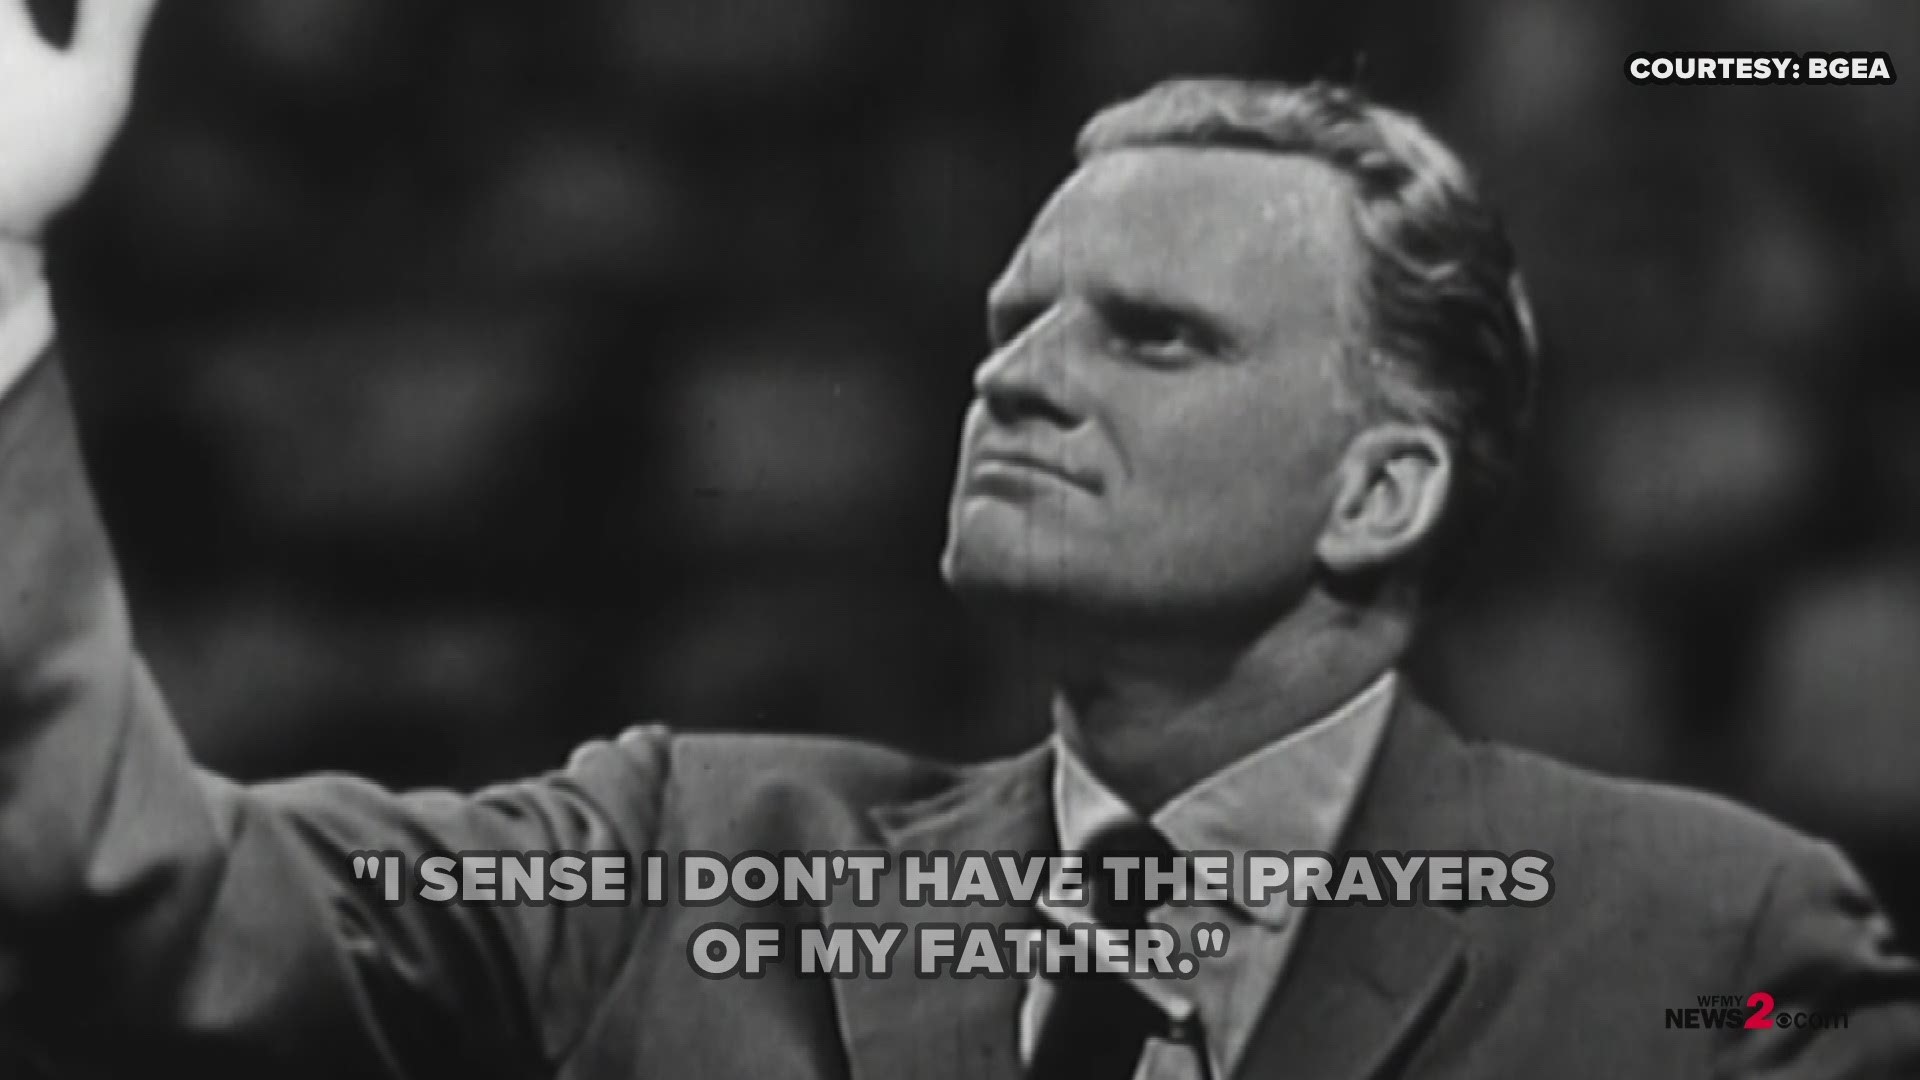 Rev. Franklin Graham talks about what he misses most about his late father, Rev. Billy Graham